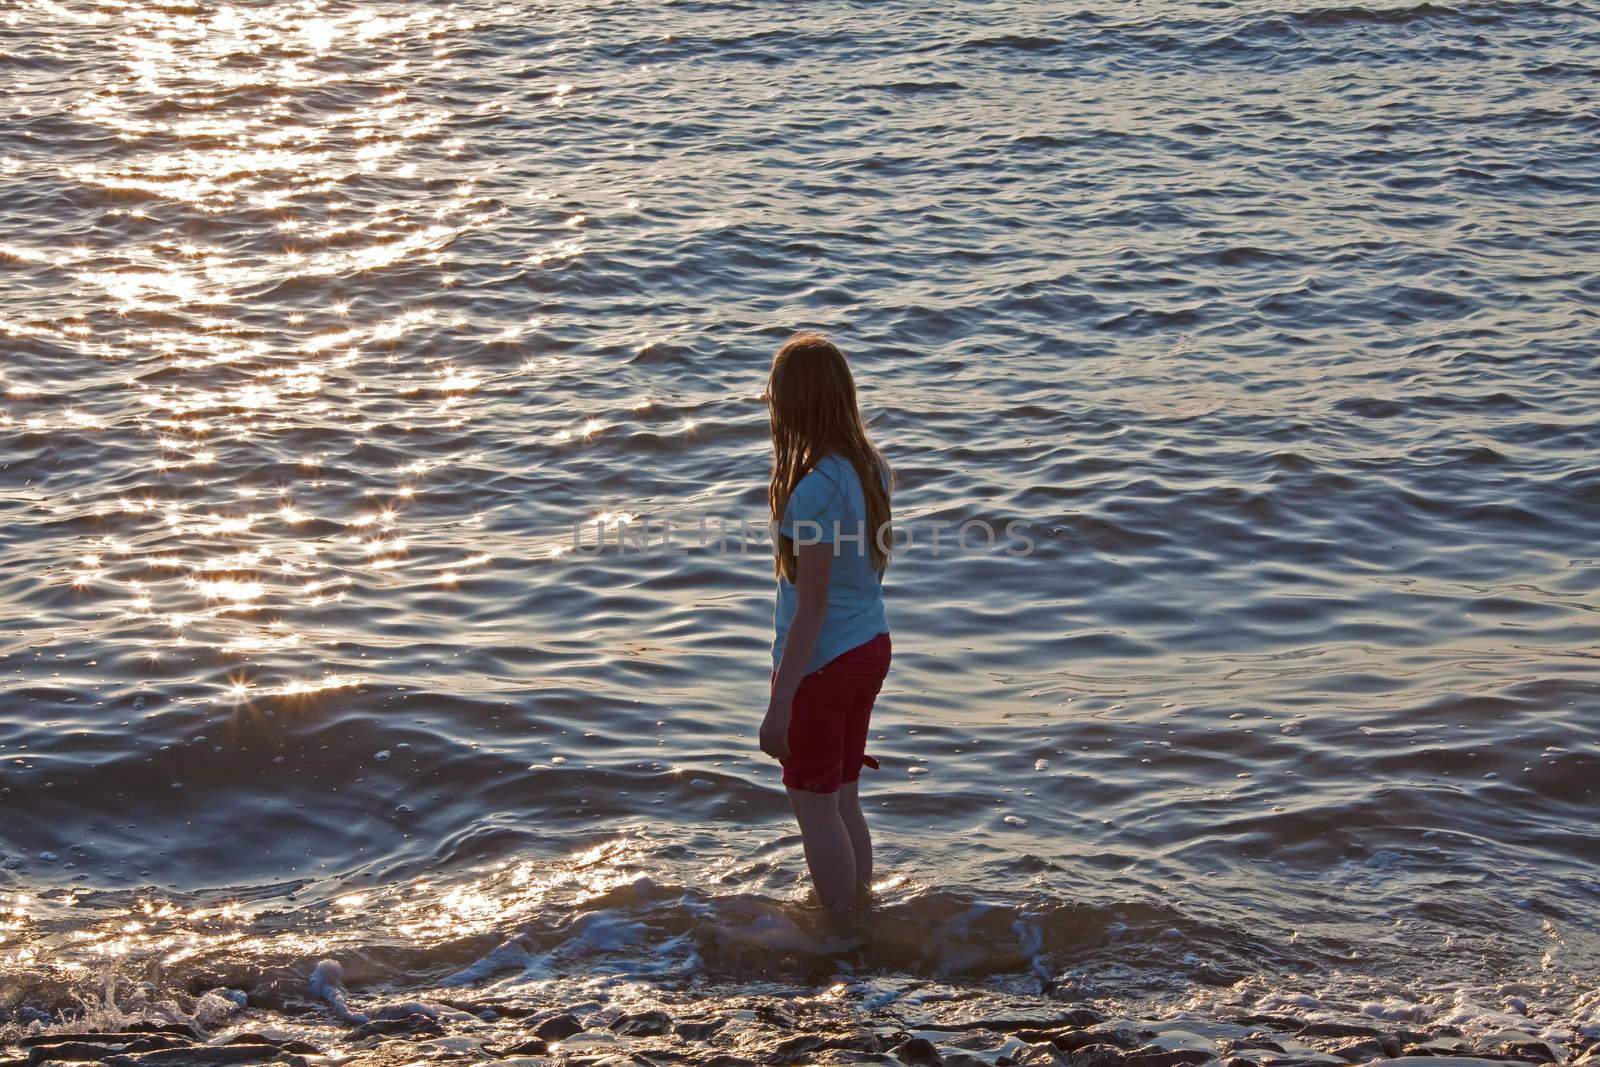 This image shows a girl at sea in the evening sun